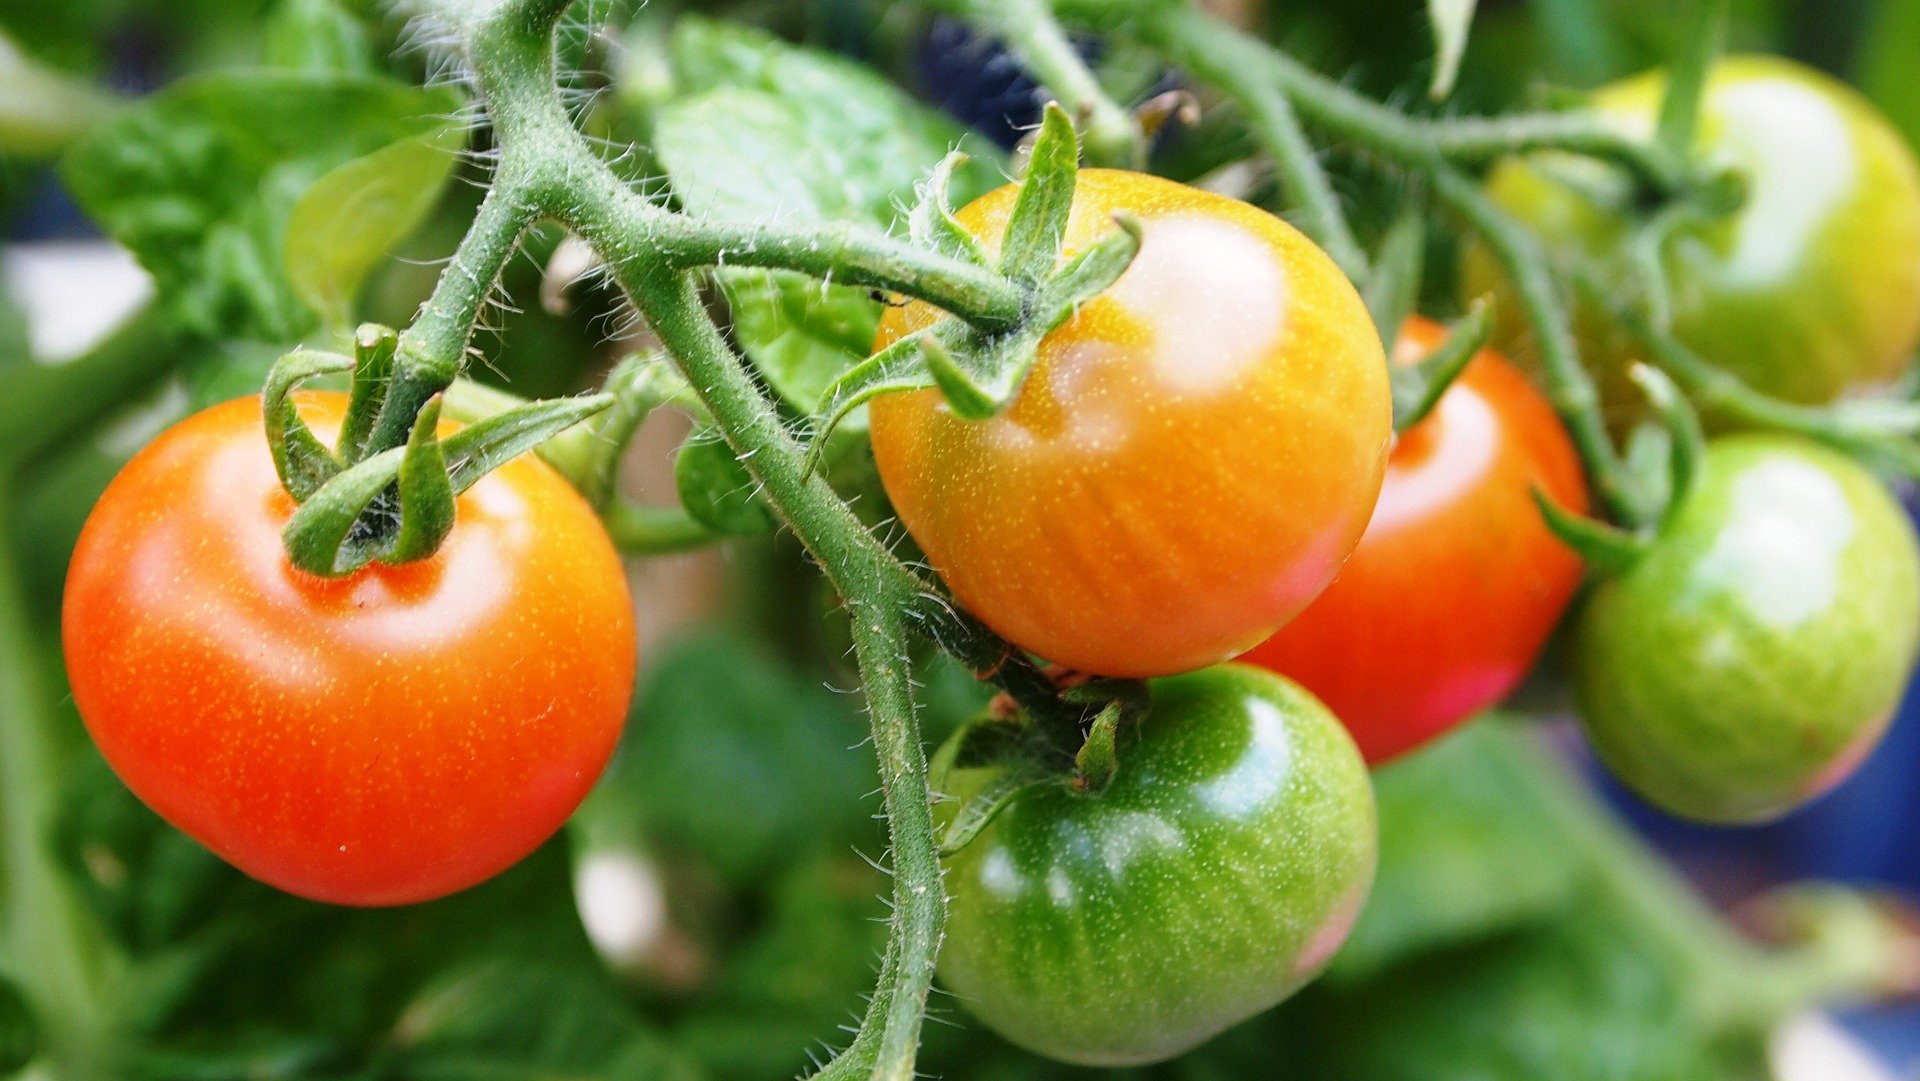 How to cultivate tomato